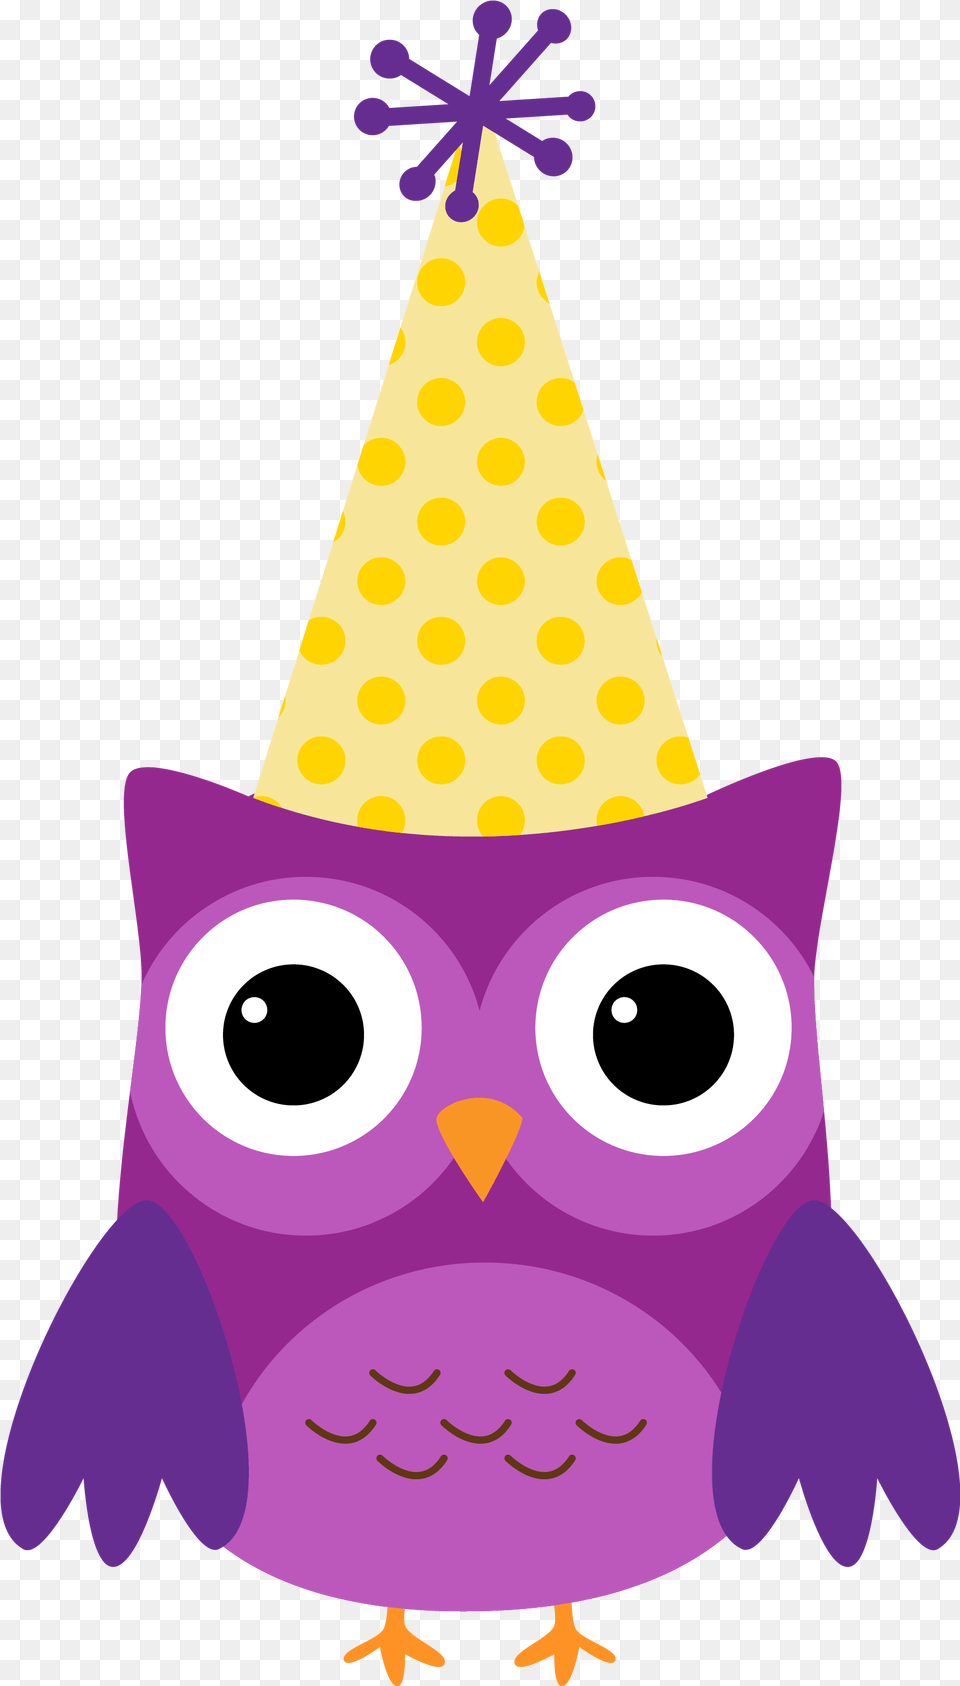 Corujas 3 Owl6png Minus Imgenes De Bho Cute Birthday Owl Clipart, Clothing, Hat, Party Hat Png